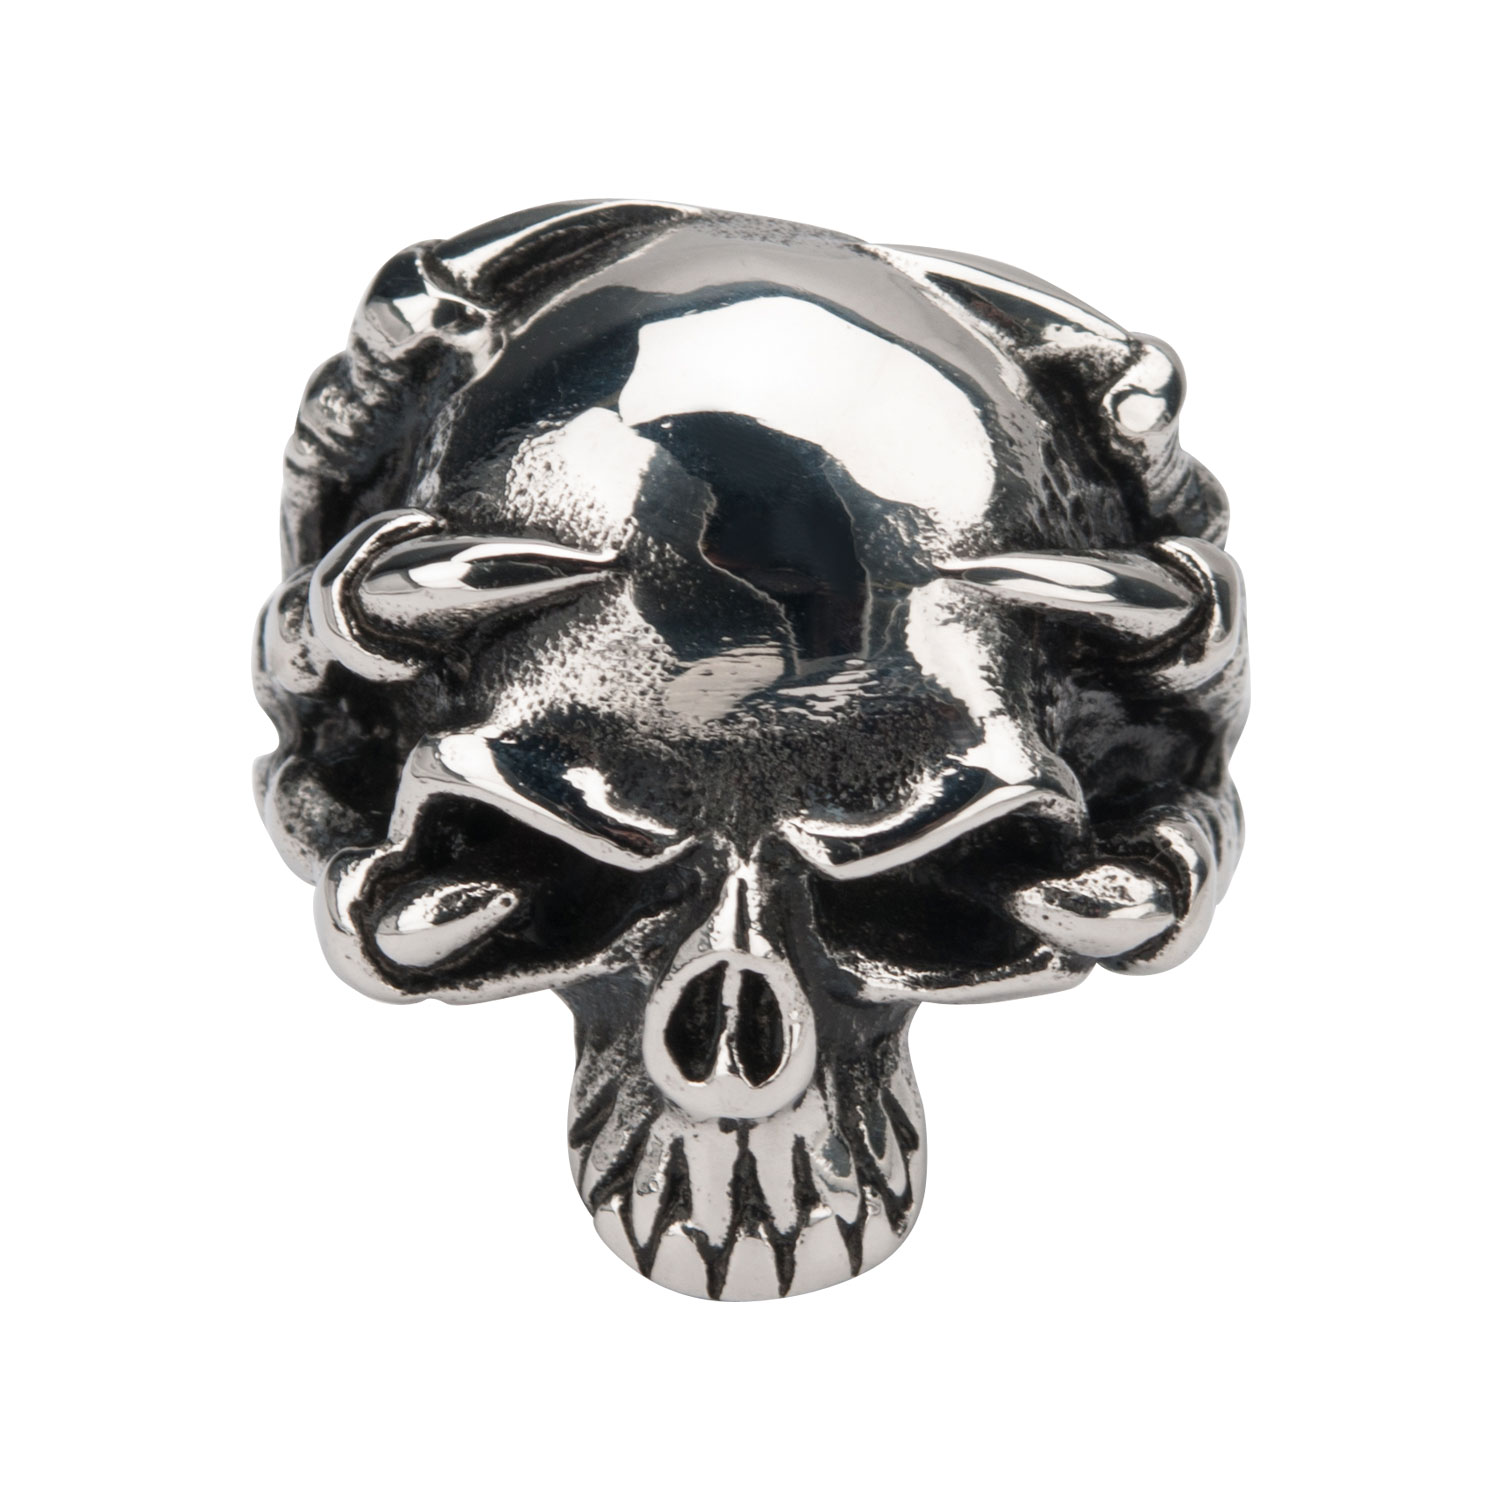 Black Oxidized Skull Ring with Claws Image 2 Lewis Jewelers, Inc. Ansonia, CT